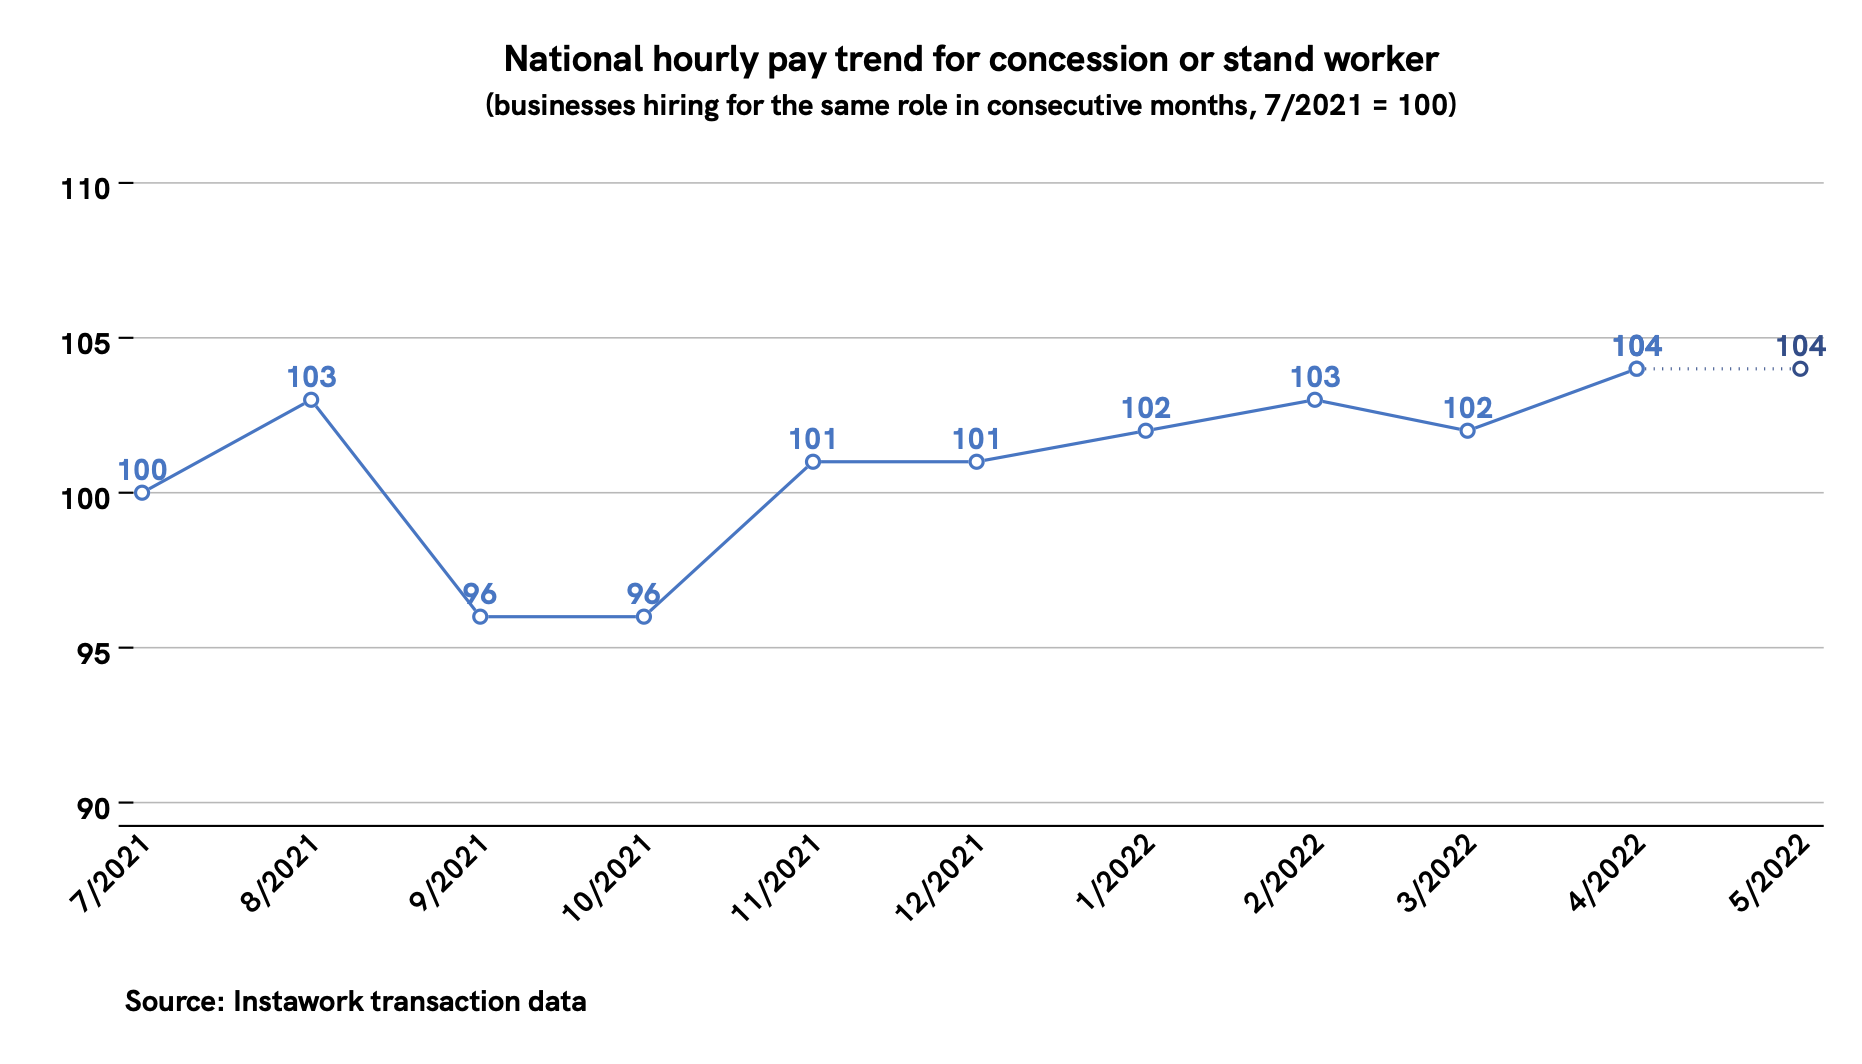 2 May 2022 pay trend for concession or stand worker